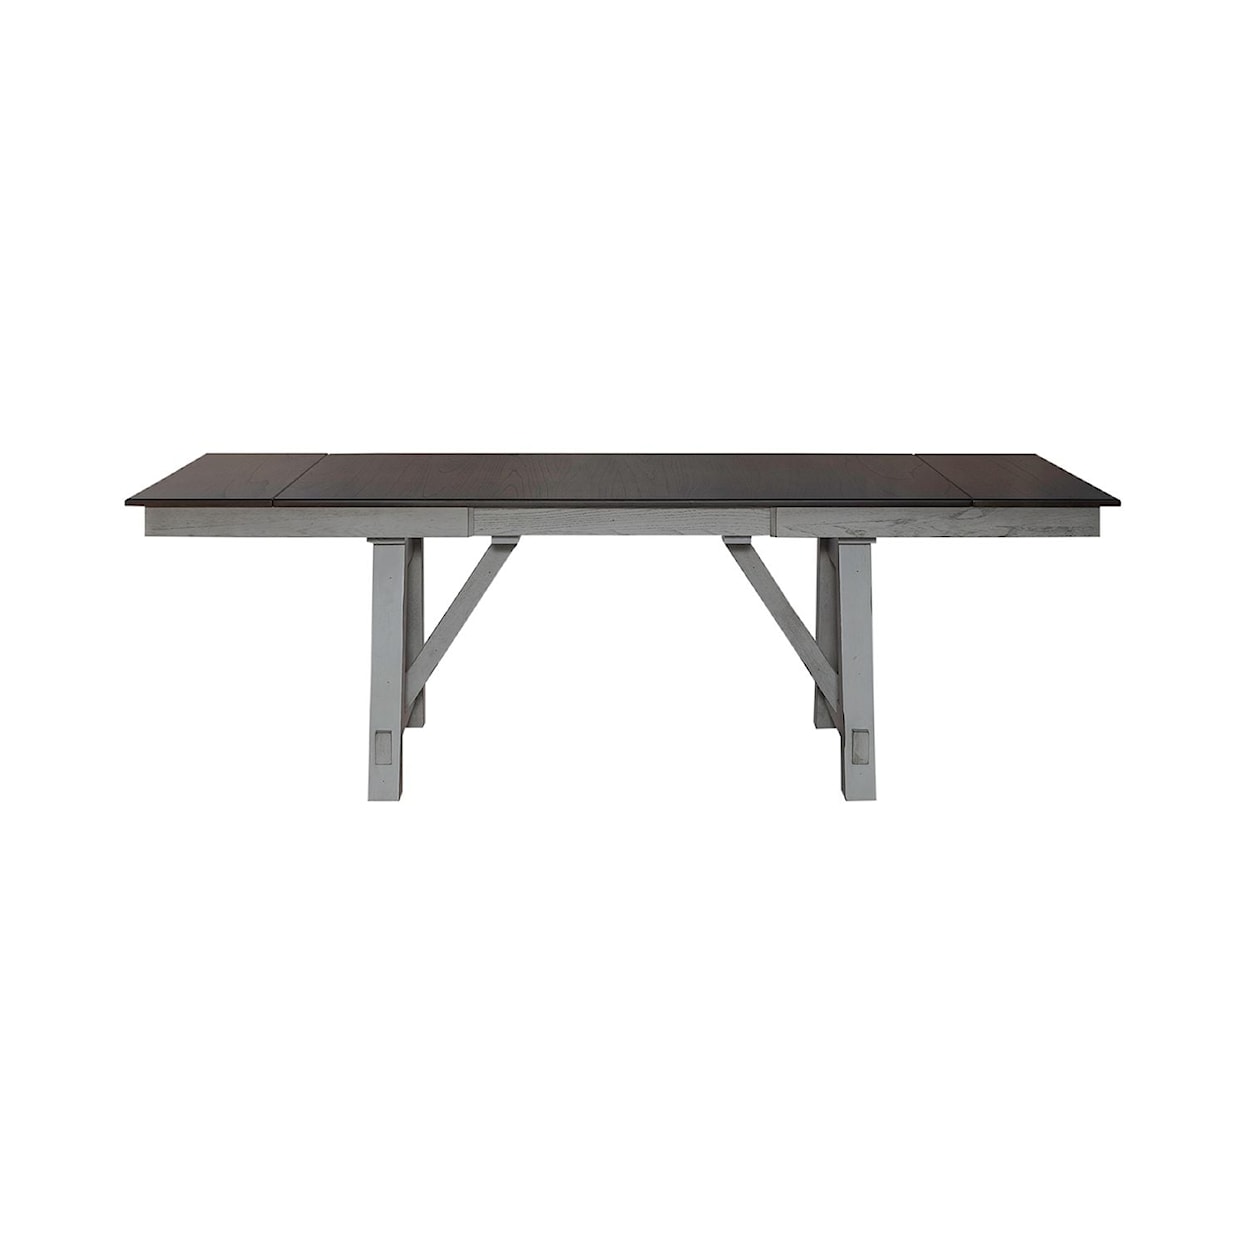 Libby Newport Dining Table